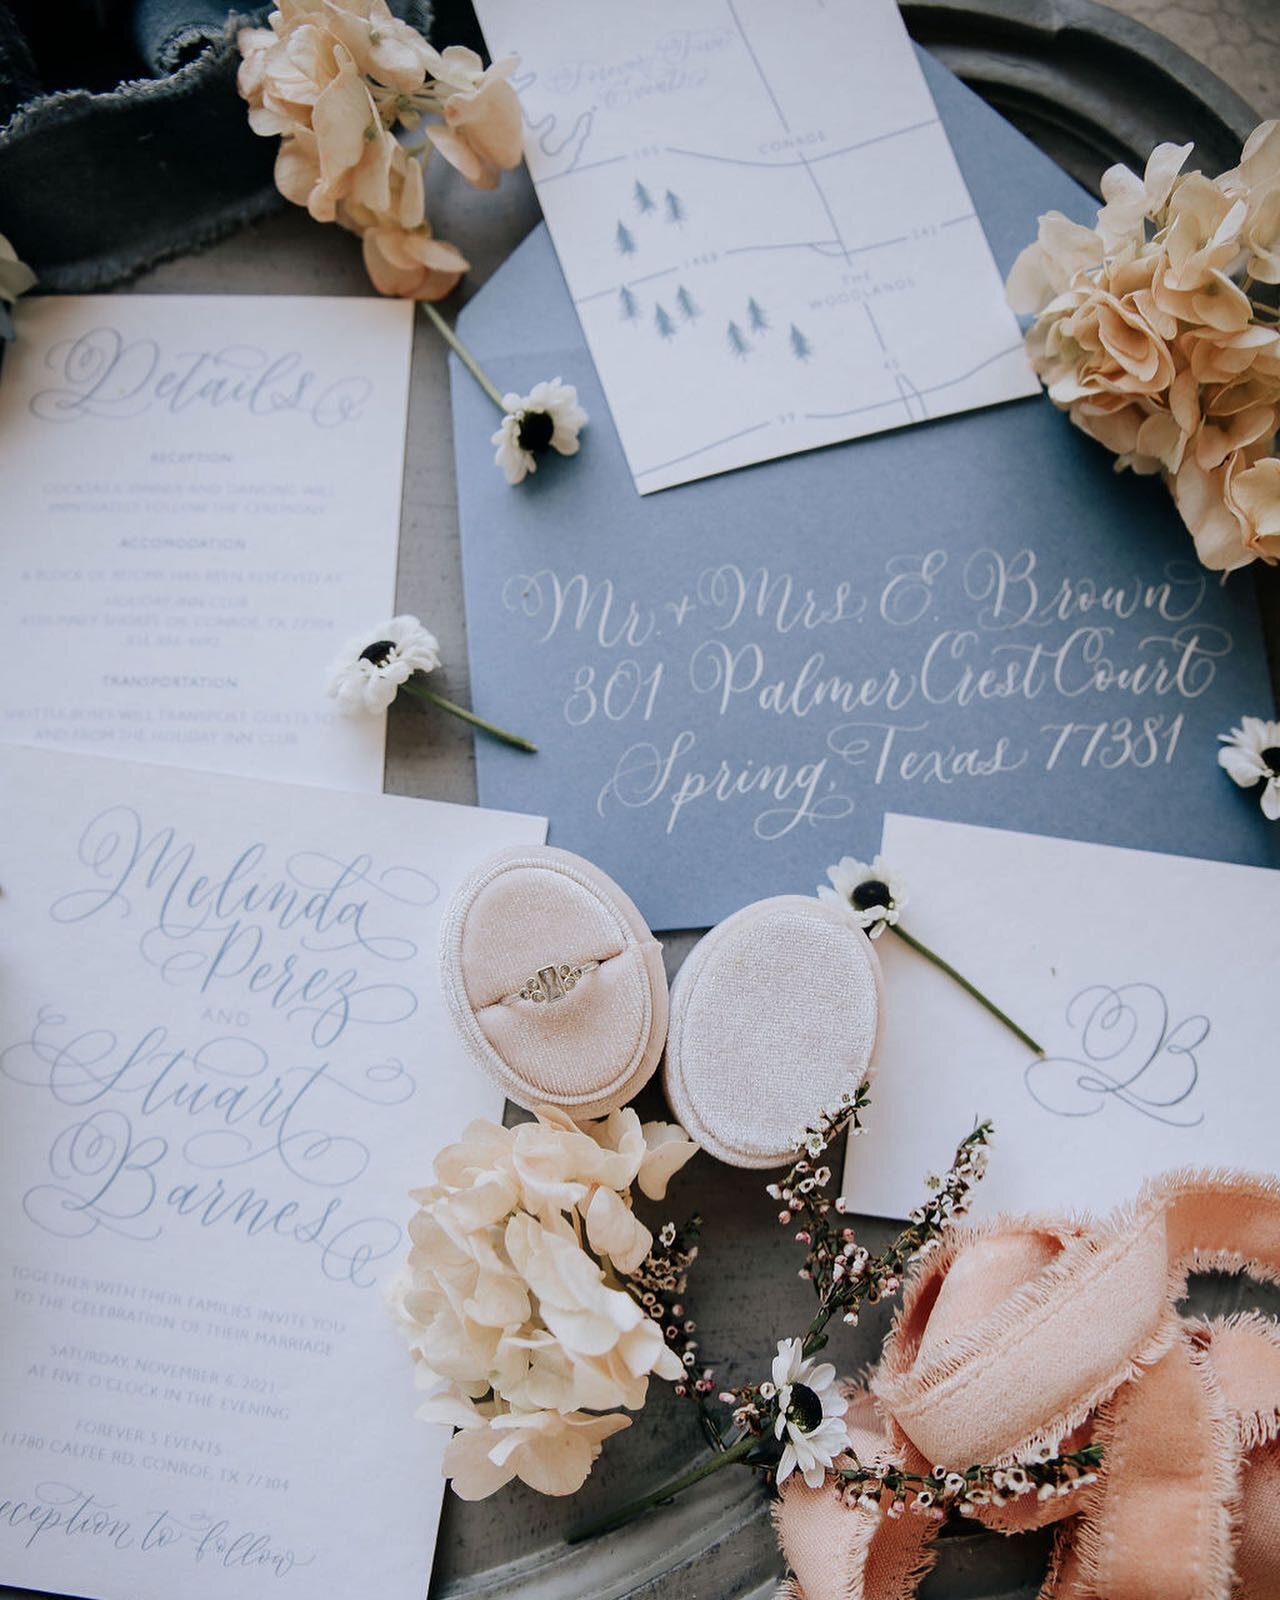 Dusty blue is one of those classic colors that looks good in any season and can be mixed with plenty of colors. Here it is looking real pretty with muted peach tones 😍

@moonstruckeventstx 
@all.the.pretty.things.htx 
@specialmoments.photography_ 

